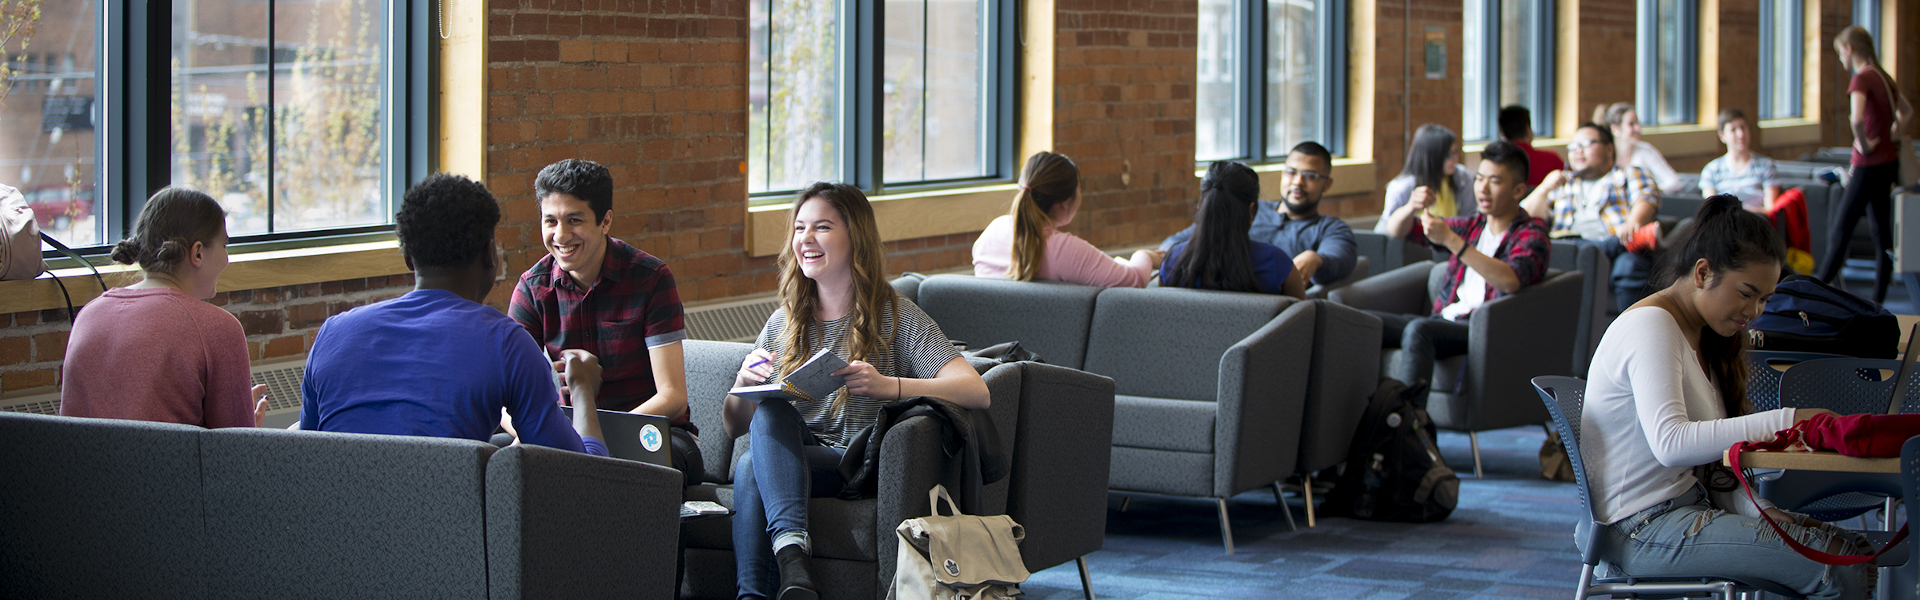 Students interacting on couches in the foyer at the Downtown Campus.